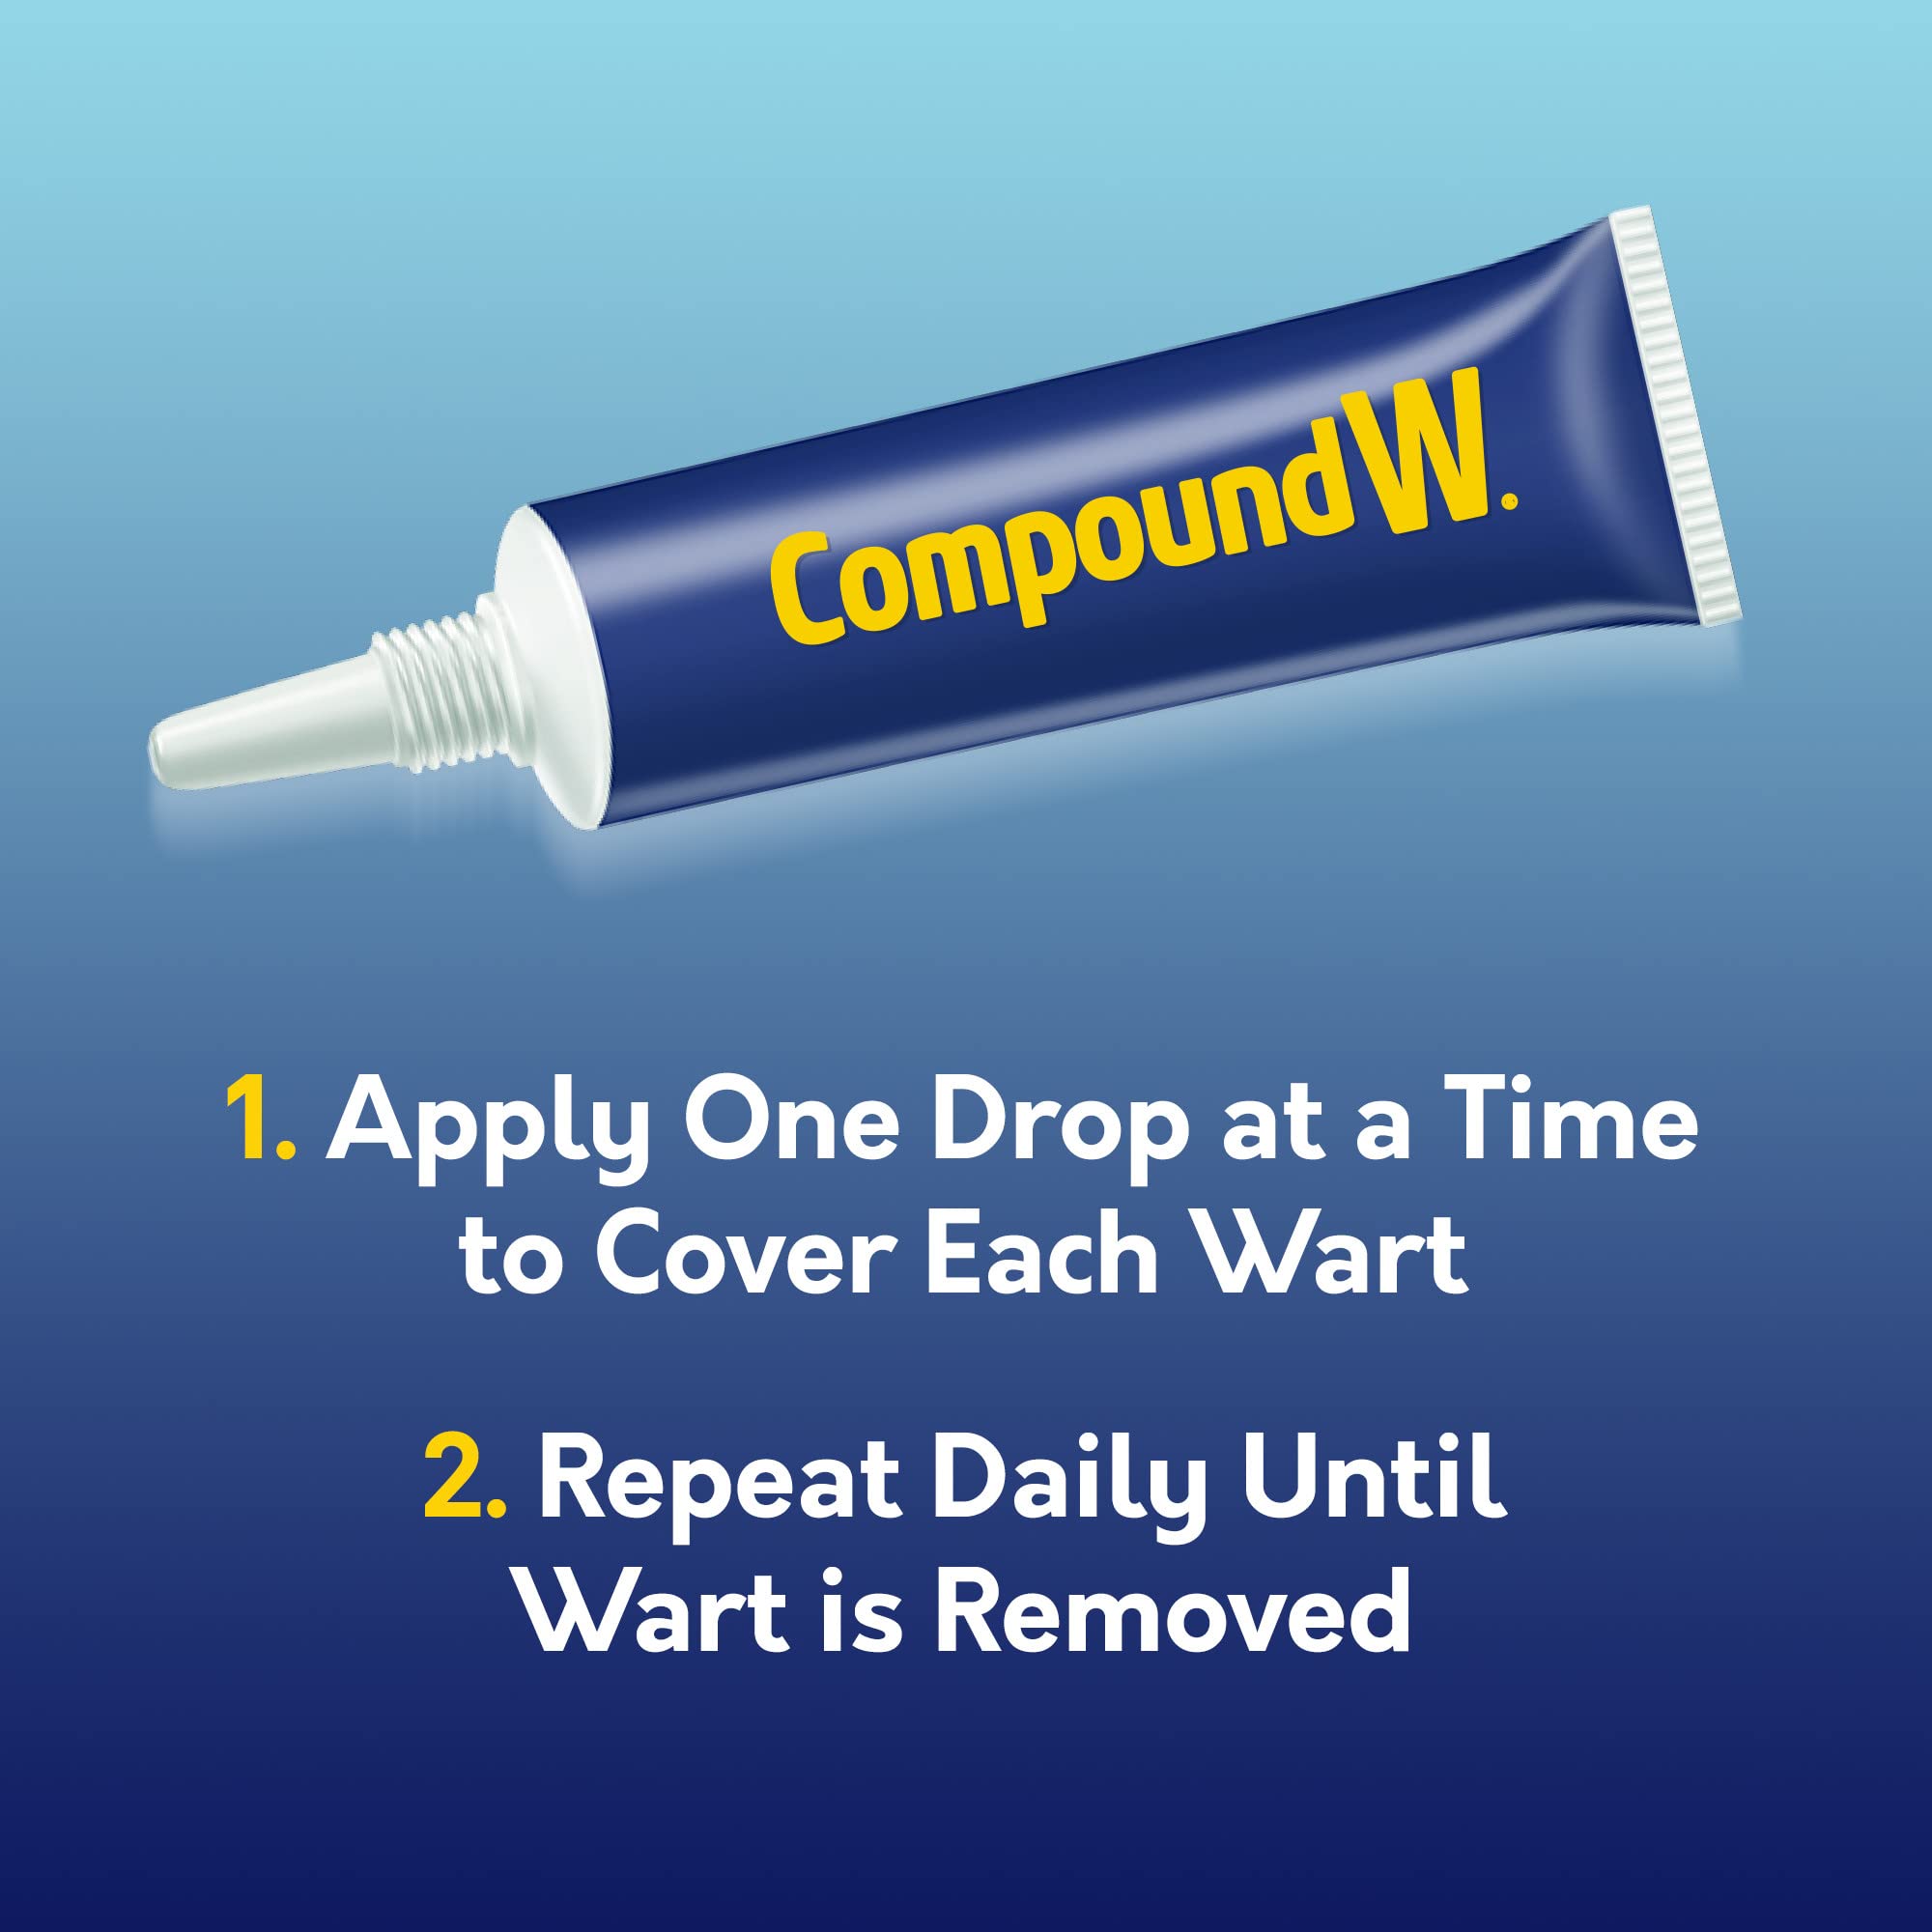 Compound W Maximum Strength Fast Acting Gel Wart Remover, 0.25 oz